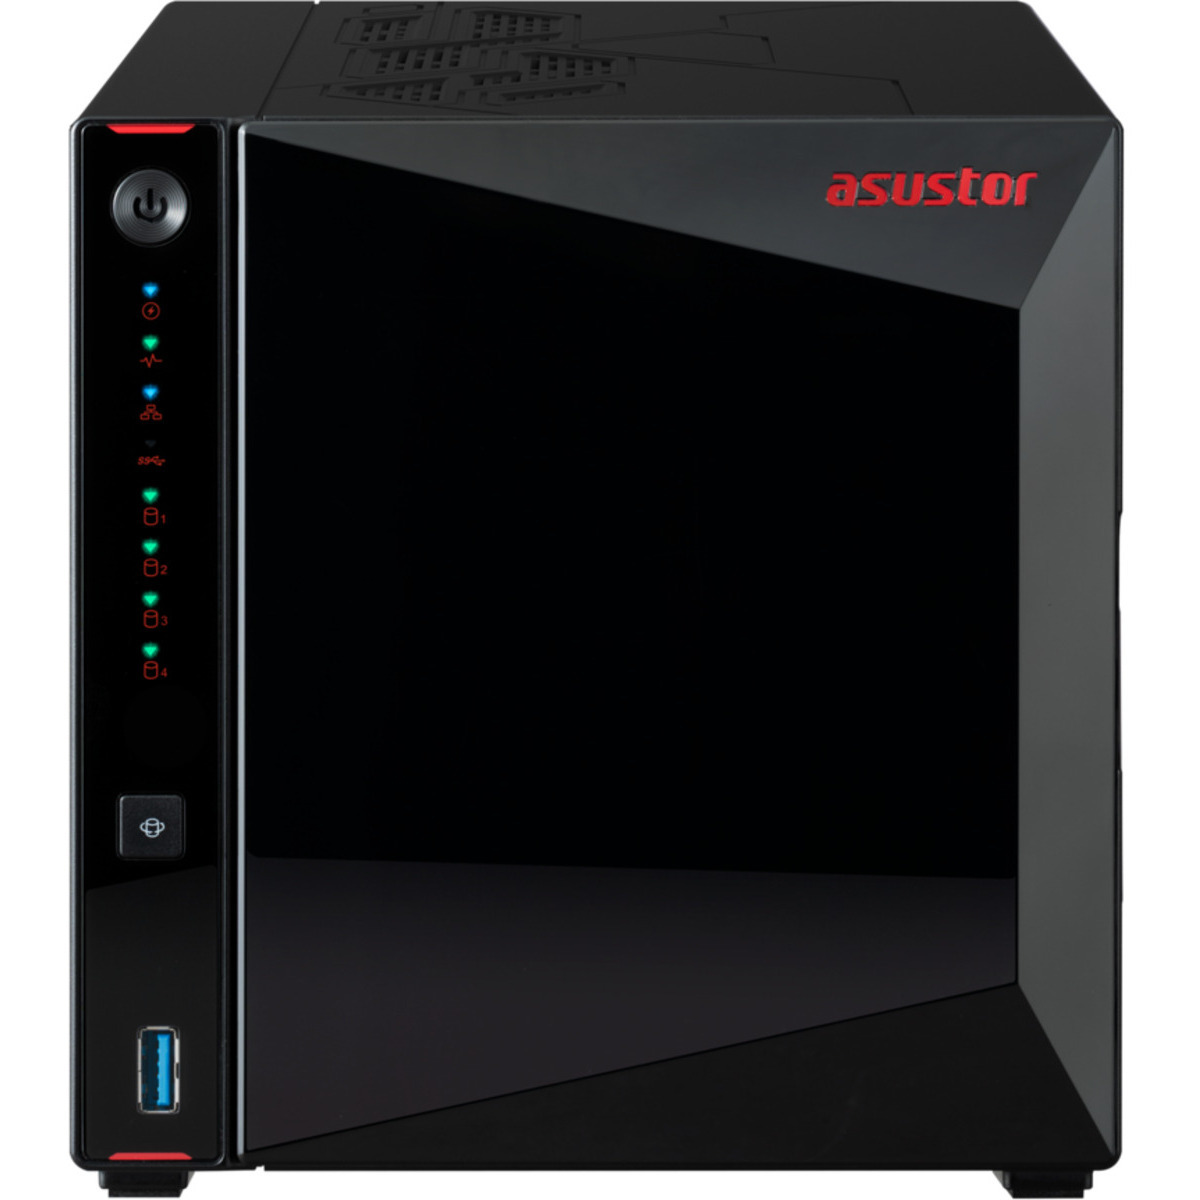 ASUSTOR Nimbustor 4 Gen2 AS5404T 4tb 4-Bay Desktop Multimedia / Power User / Business NAS - Network Attached Storage Device 4x1tb Samsung 870 EVO MZ-77E1T0BAM 2.5 560/530MB/s SATA 6Gb/s SSD CONSUMER Class Drives Installed - Burn-In Tested - FREE RAM UPGRADE Nimbustor 4 Gen2 AS5404T